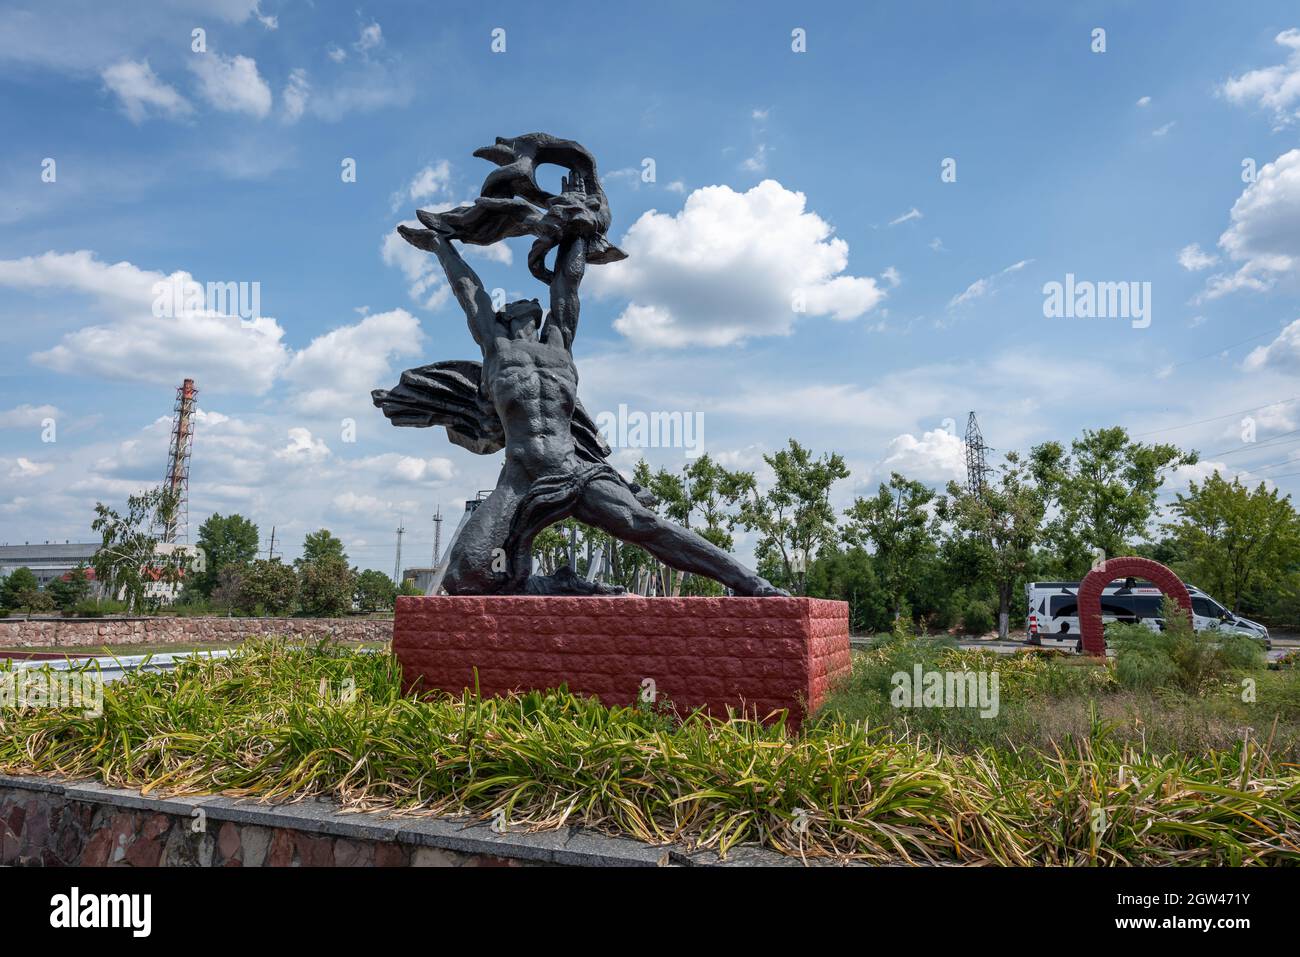 Prometheus Sculpture at Chernobyl Nuclear Power Plant - Chernobyl Exclusion Zone, Ukraine Stock Photo